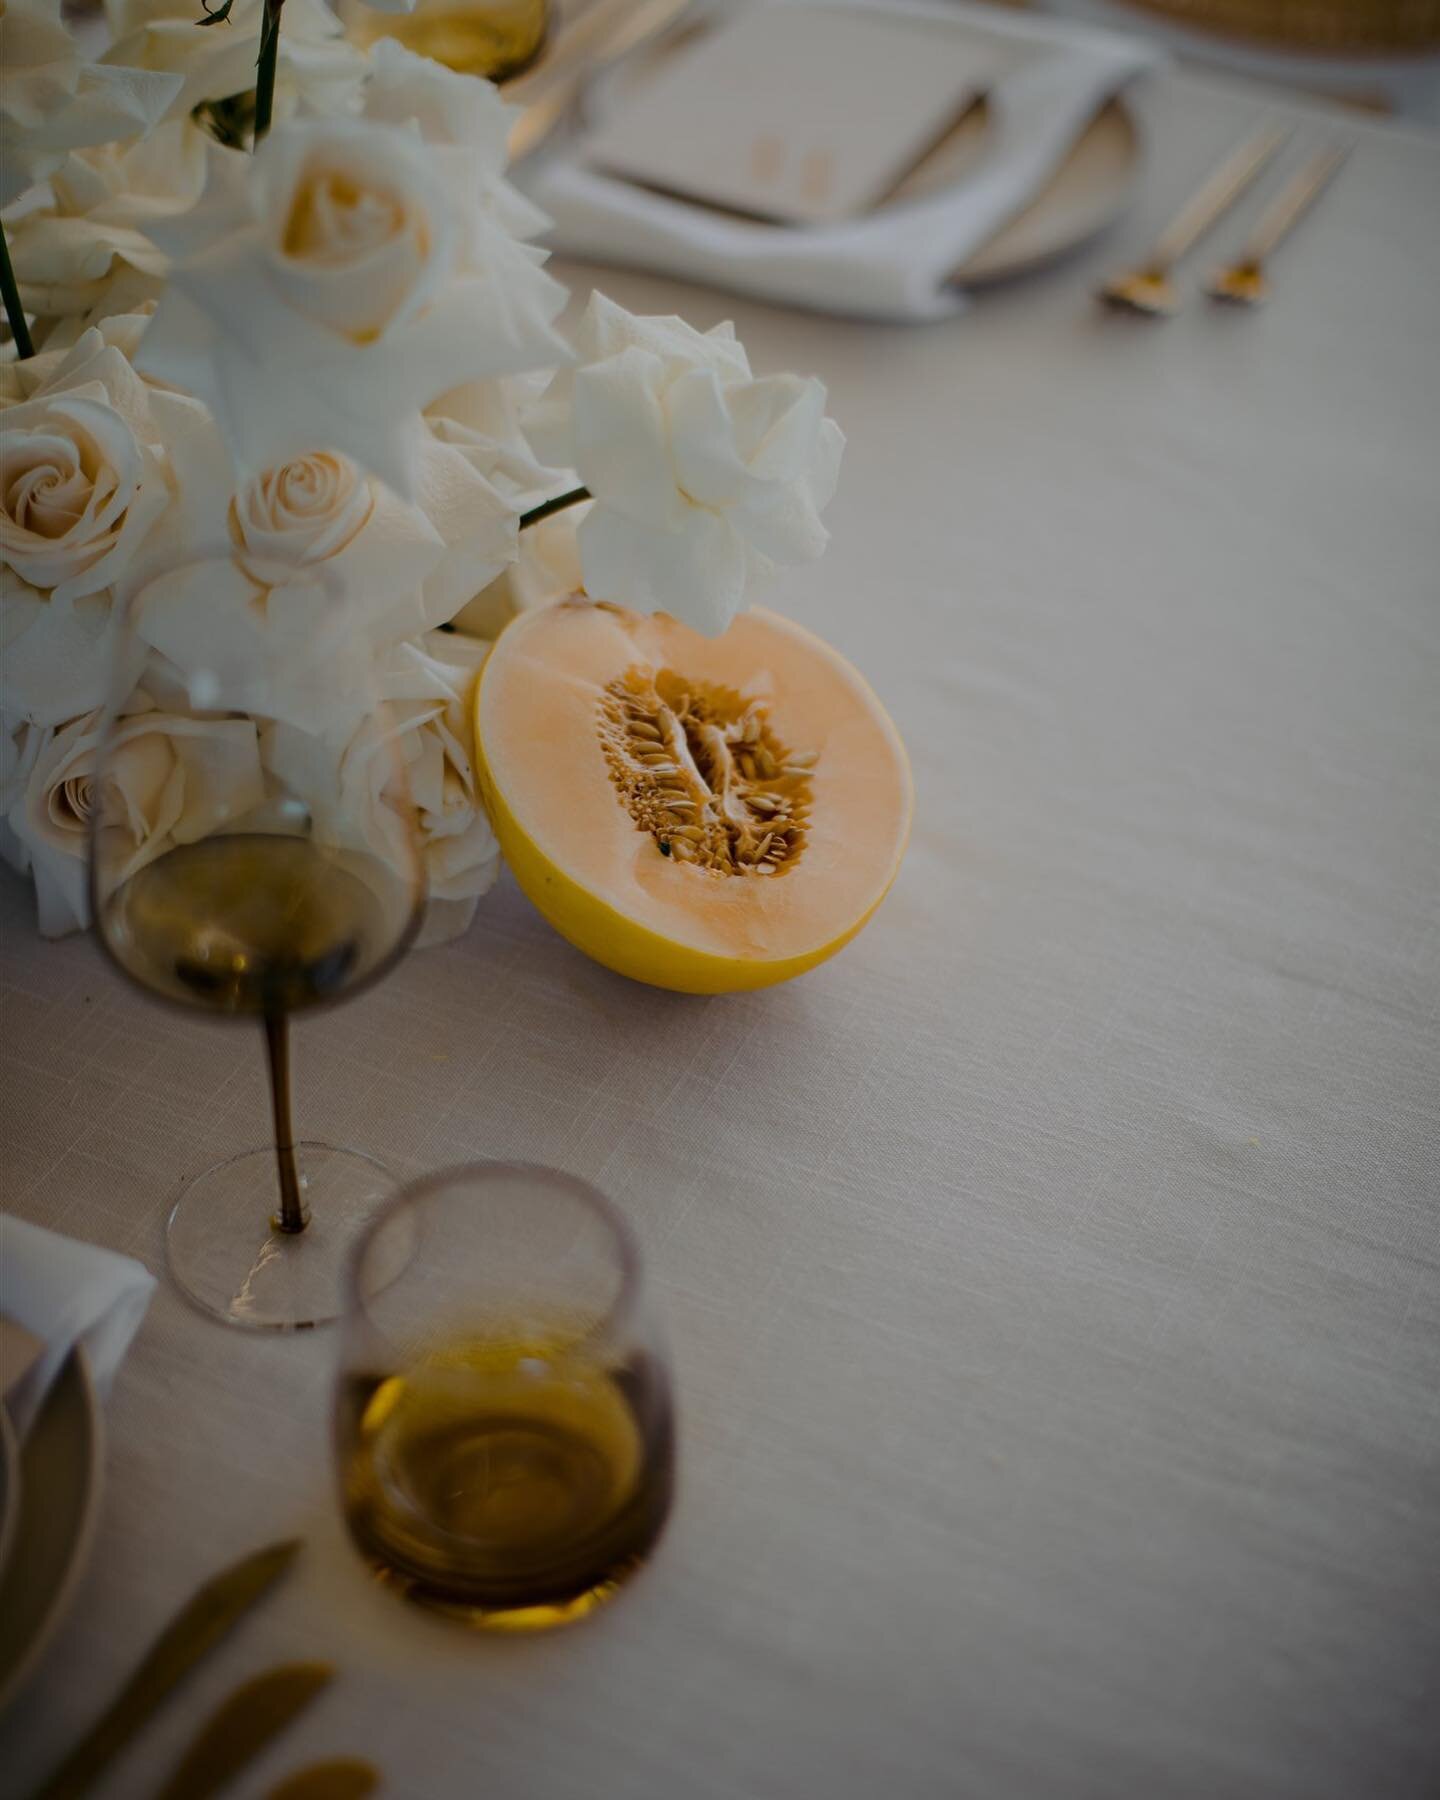 The details are in the melons

Captured by @flossyphoto